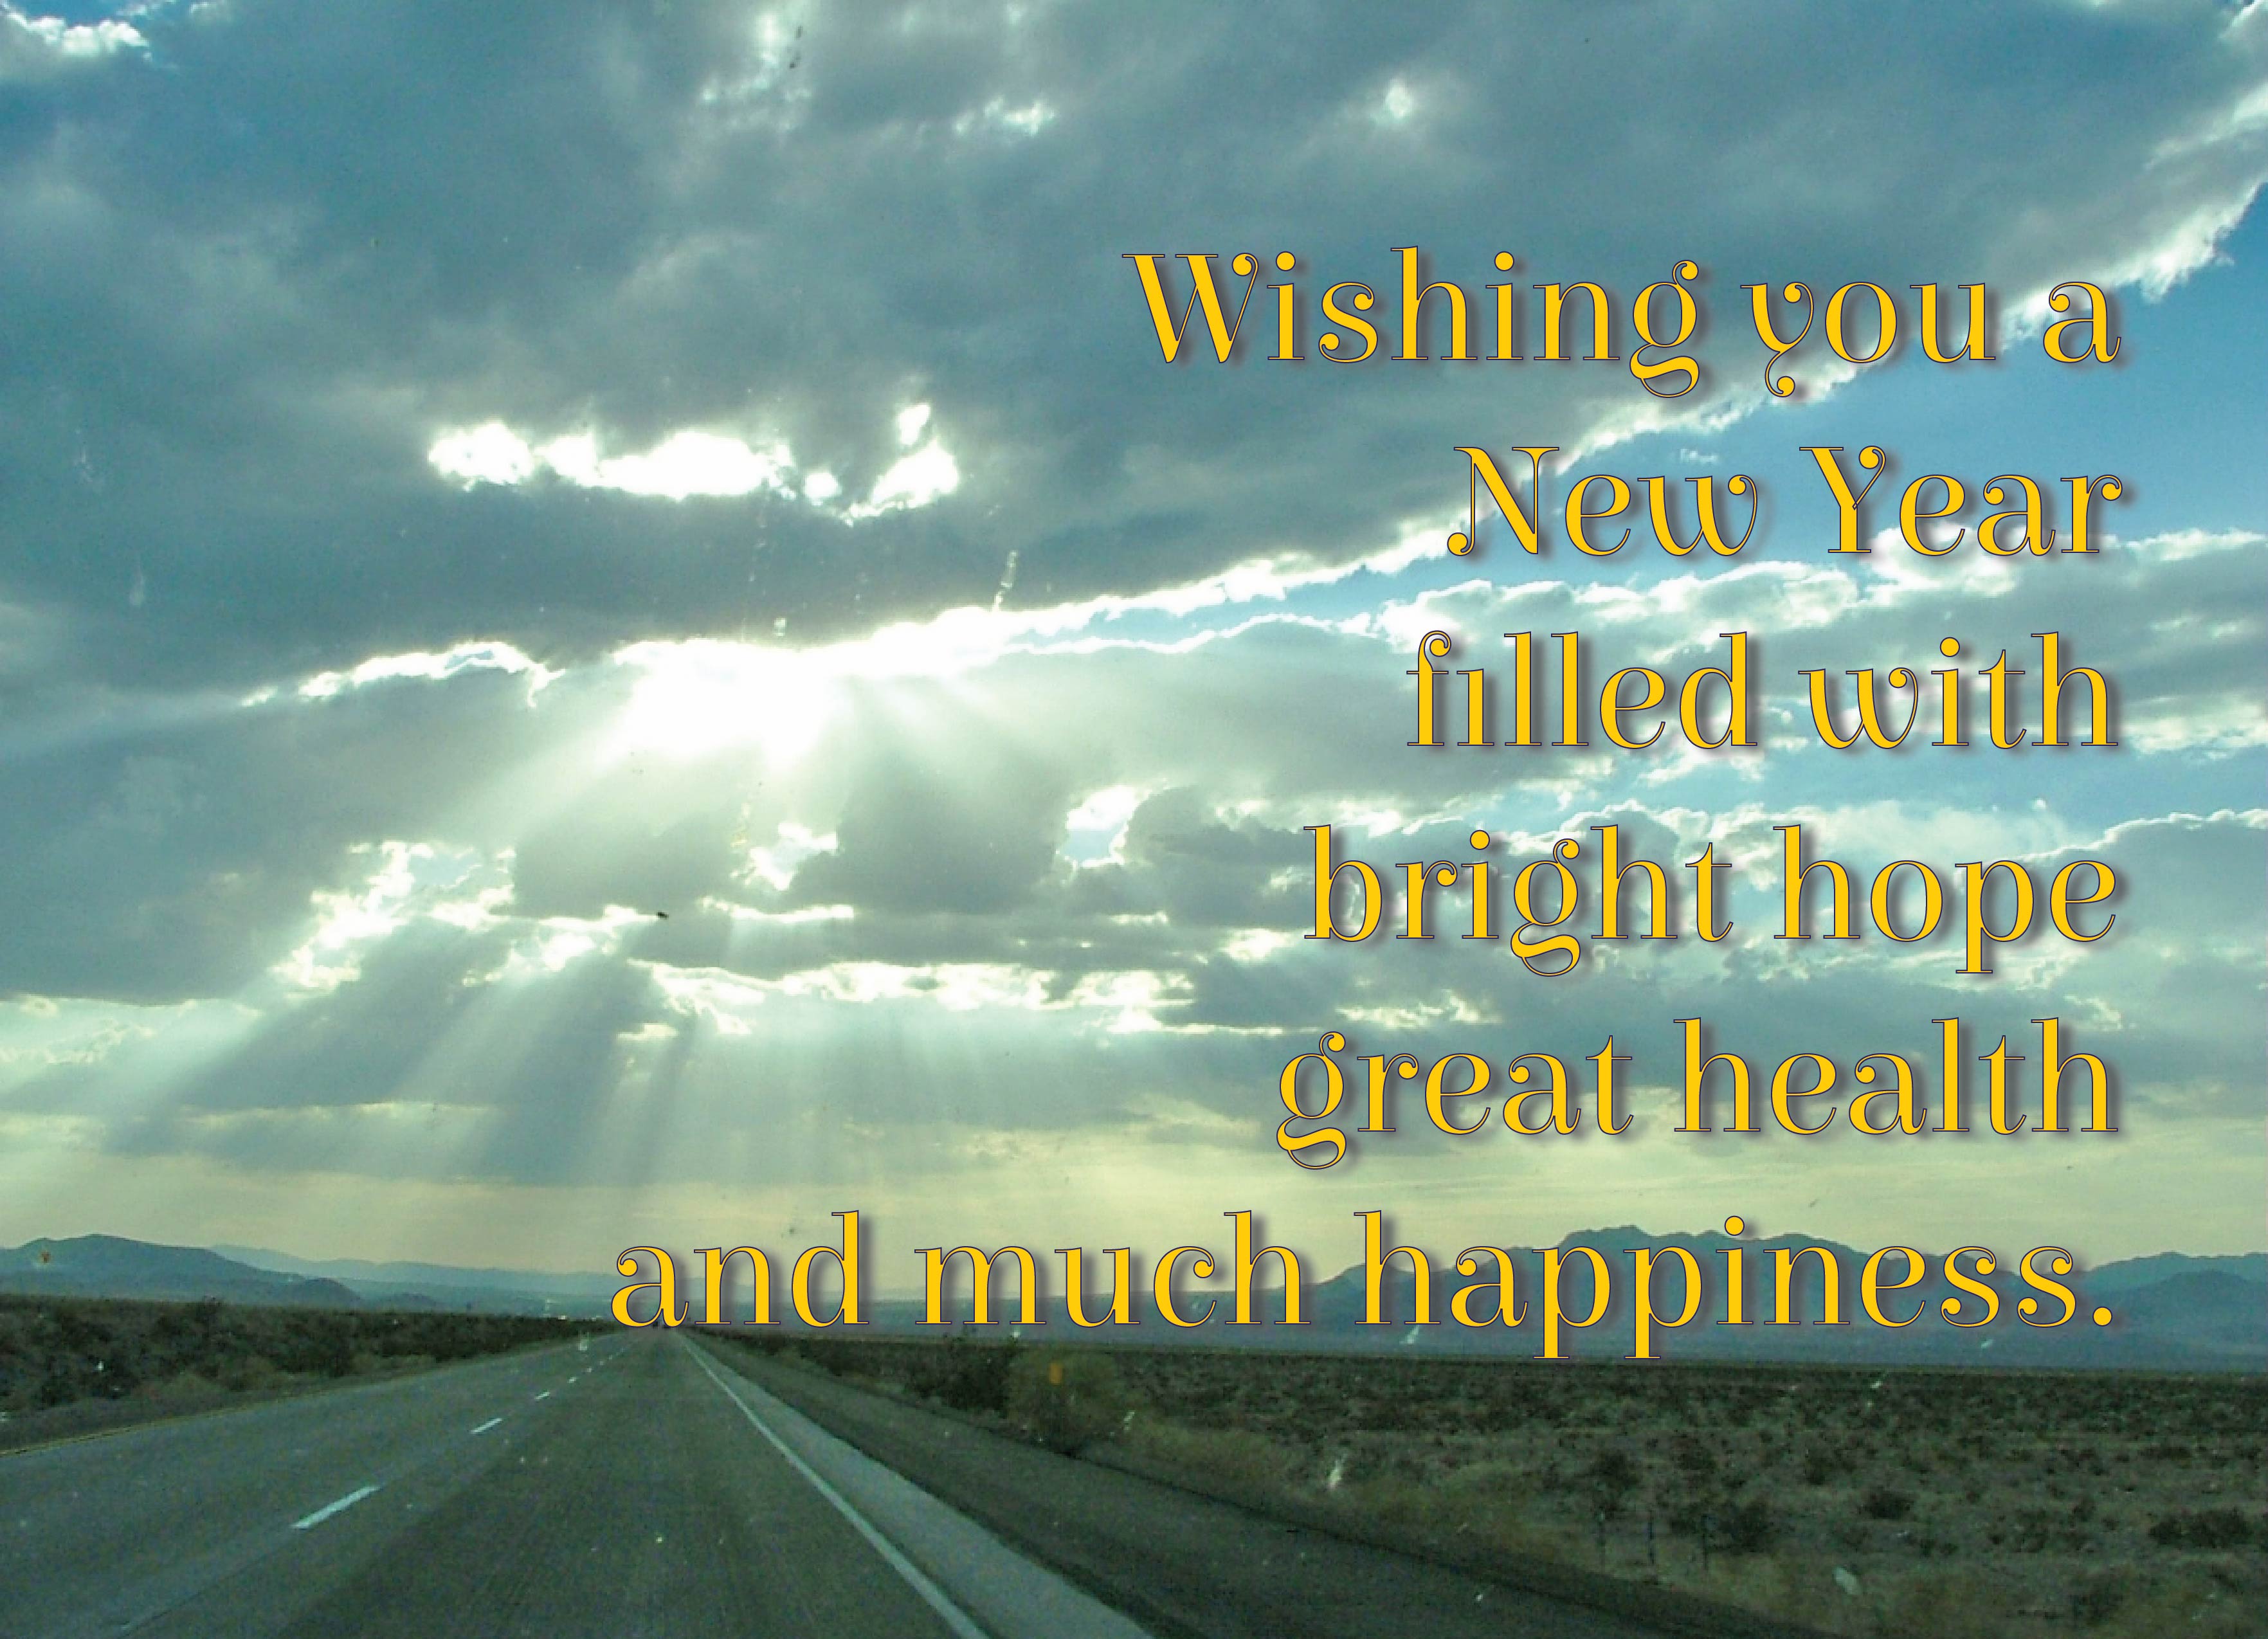 A New Year Greeting